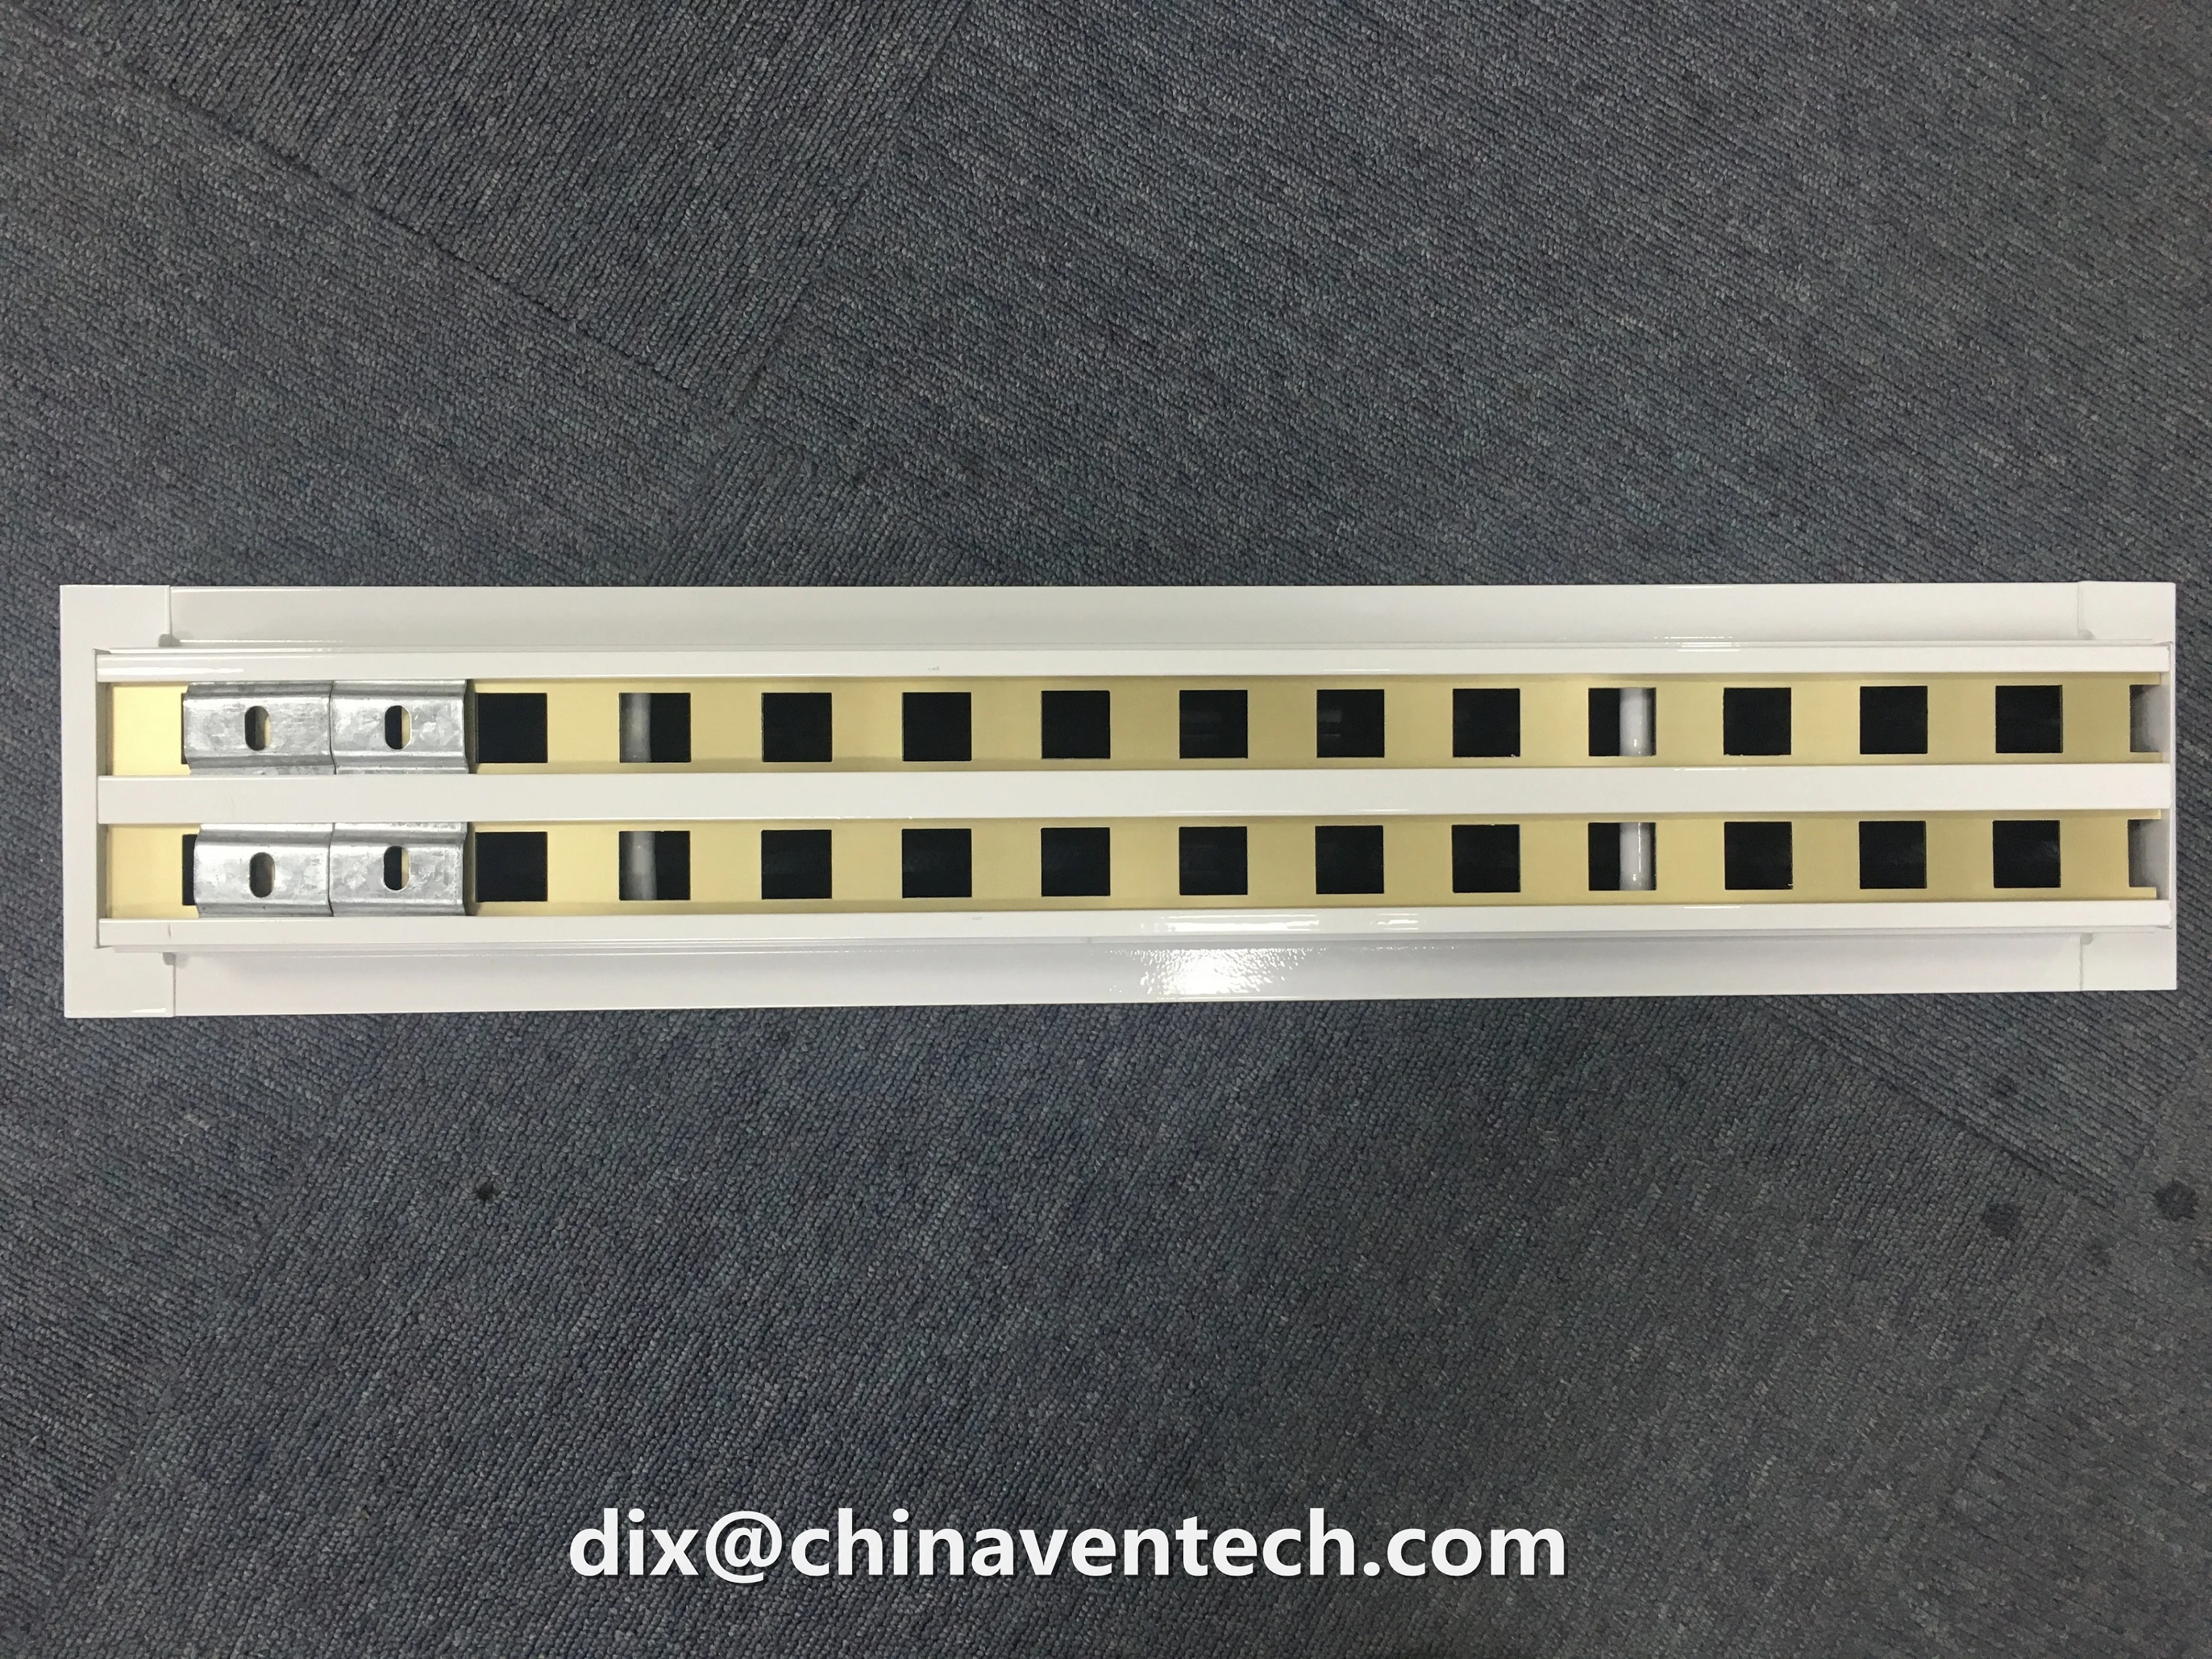 Modern design ceiling mounted linear slot air vent diffuser with 8" plenum box